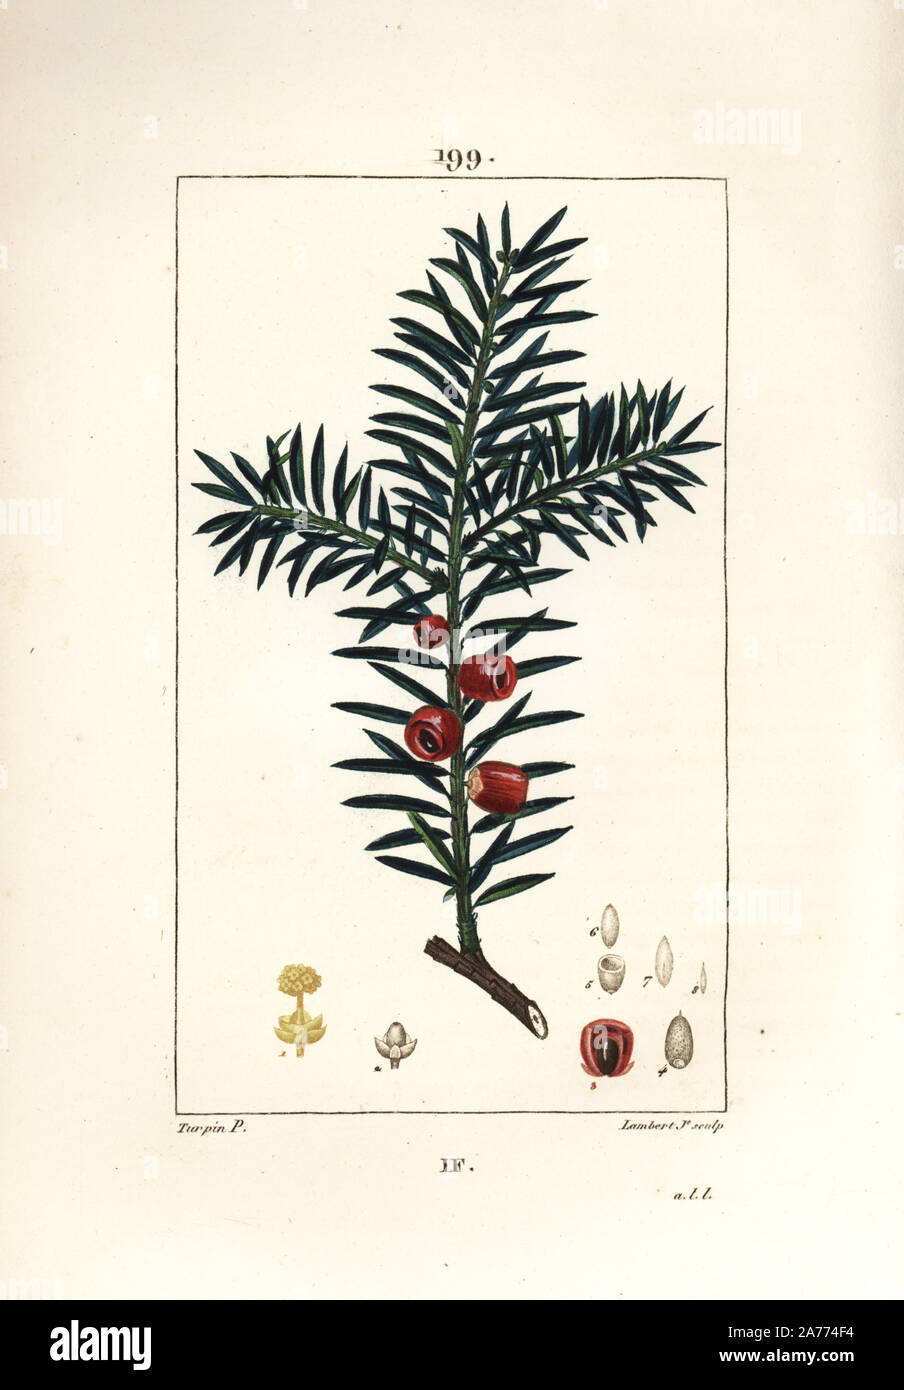 Yew tree, Taxus baccata. Handcoloured stipple copperplate engraving by Lambert Junior from a drawing by Pierre Jean-Francois Turpin from Chaumeton, Poiret and Chamberet's 'La Flore Medicale,' Paris, Panckoucke, 1830. Turpin (17751840) was one of the three giants of French botanical art of the era alongside Pierre Joseph Redoute and Pancrace Bessa. Stock Photo